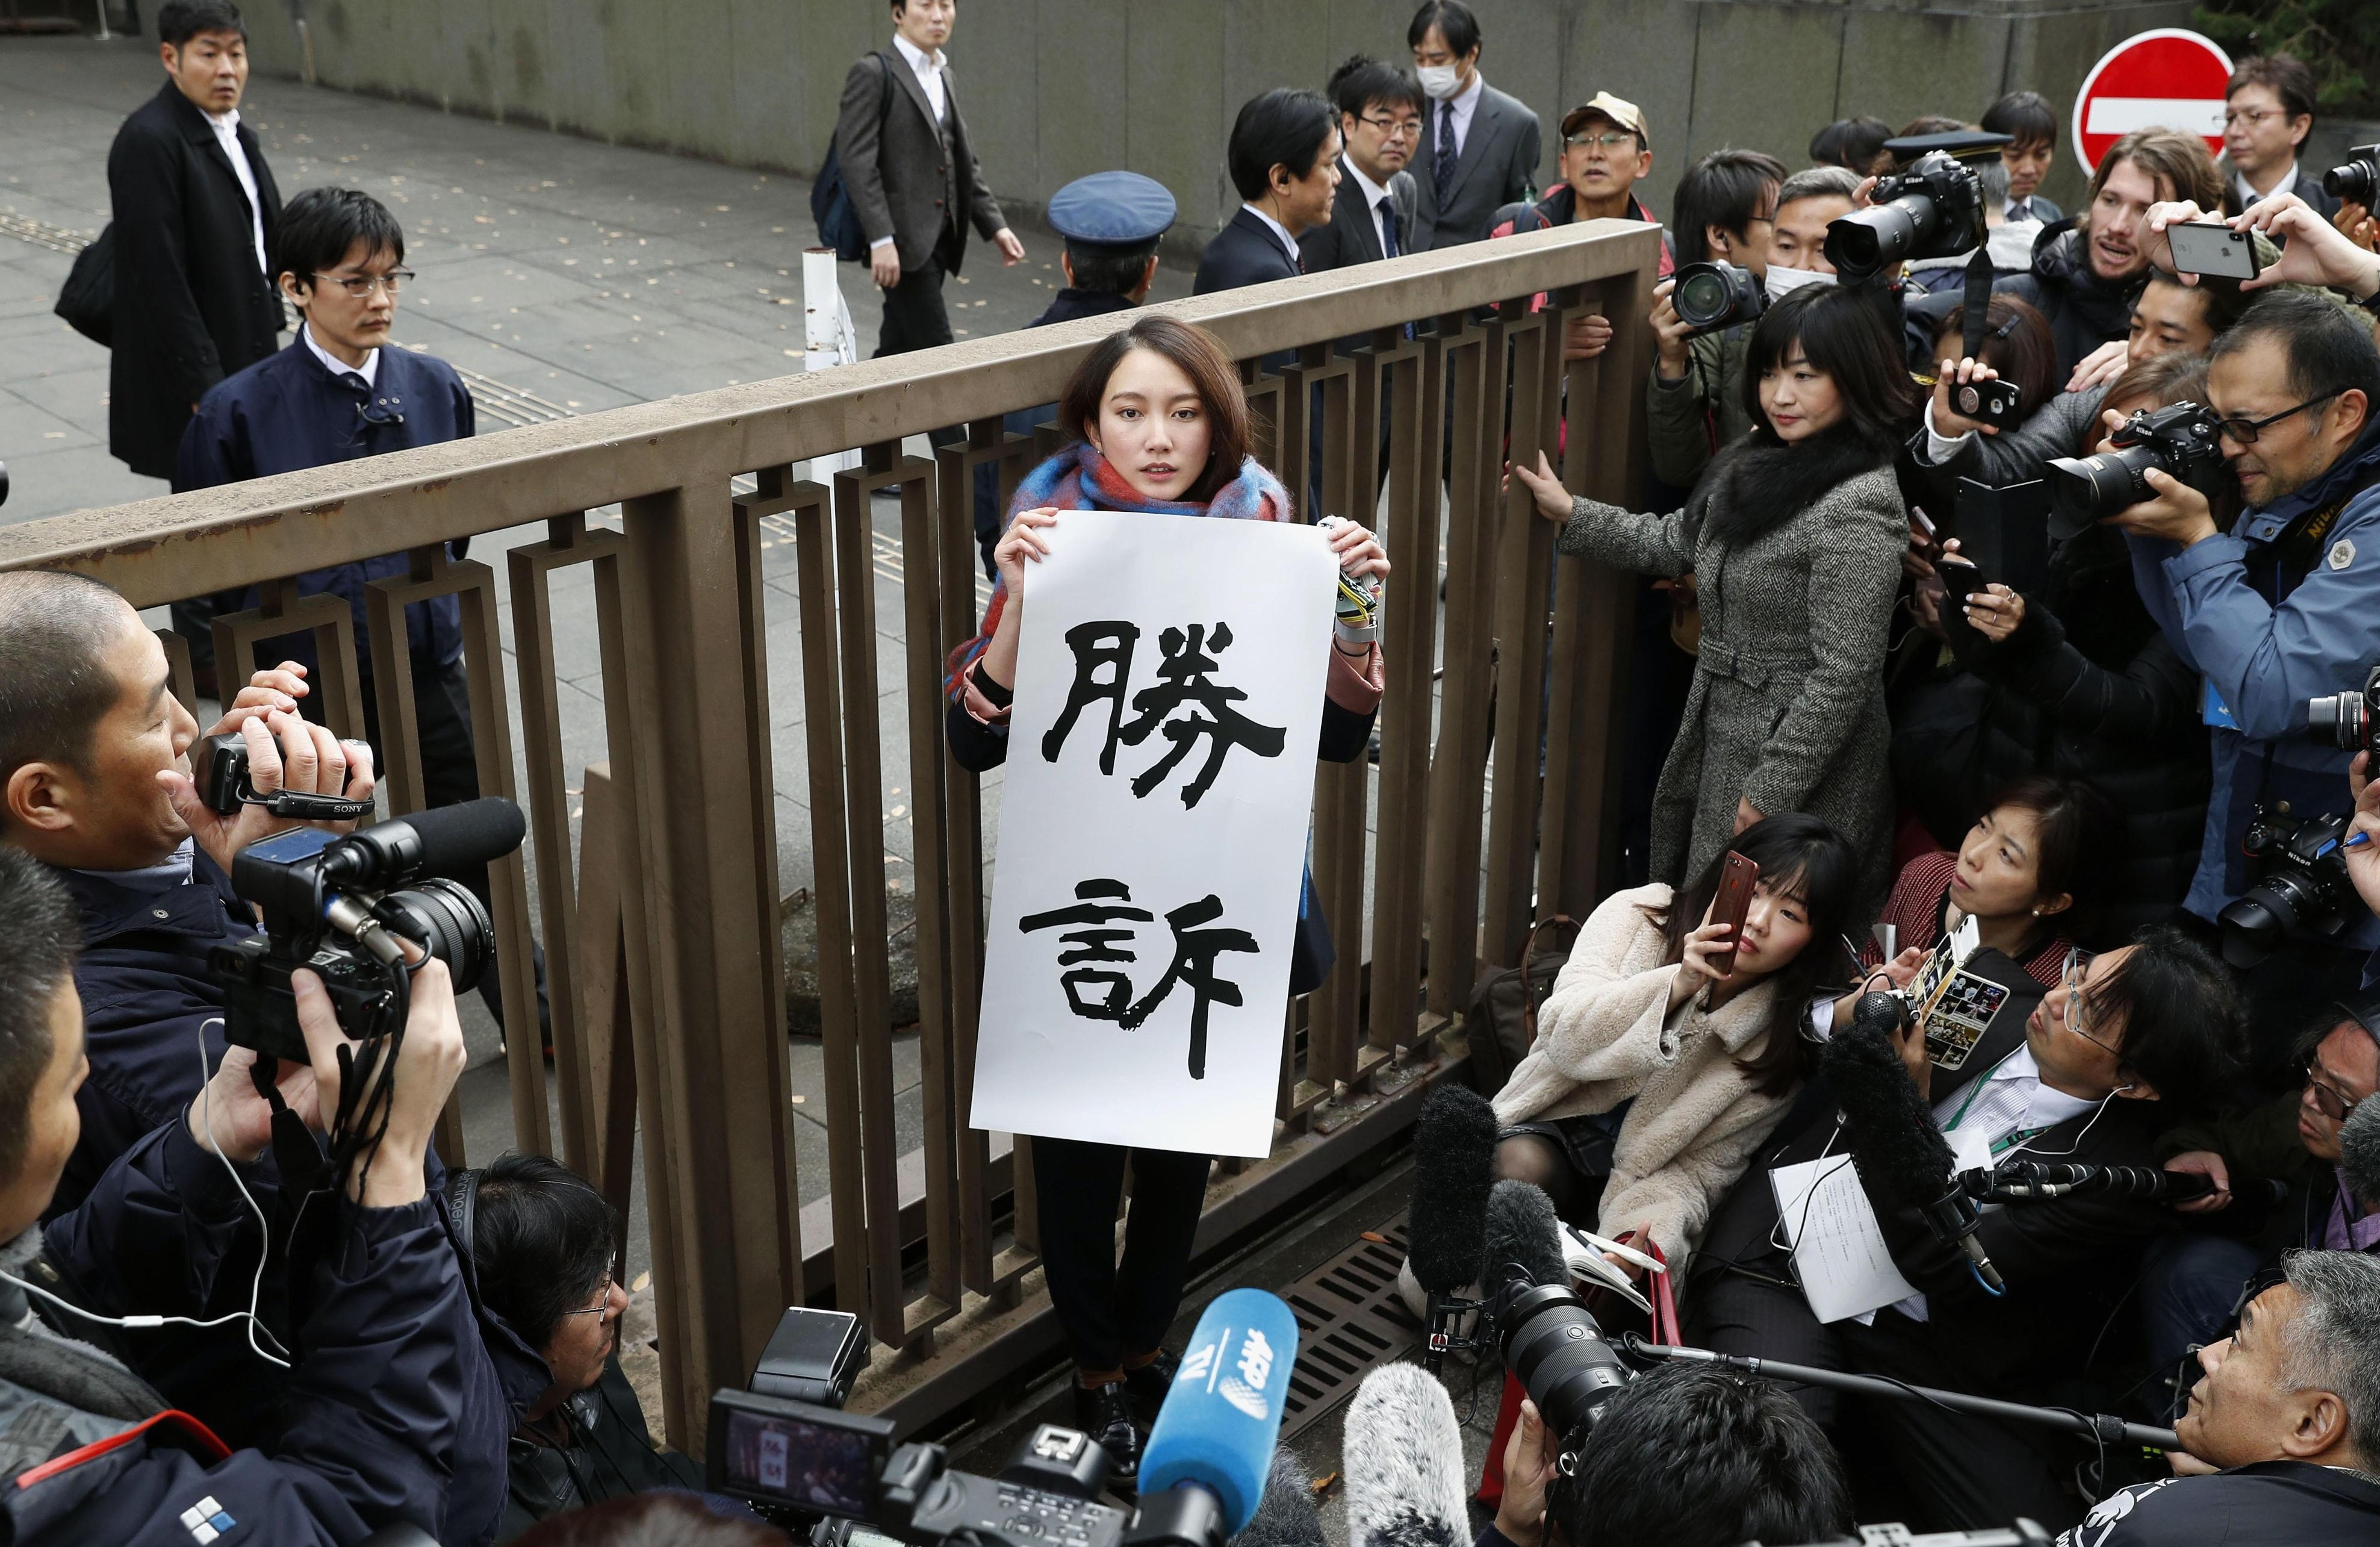 Japan journalist Shiori Ito awarded ¥3.3 million in damages in high-profile rape case photo image